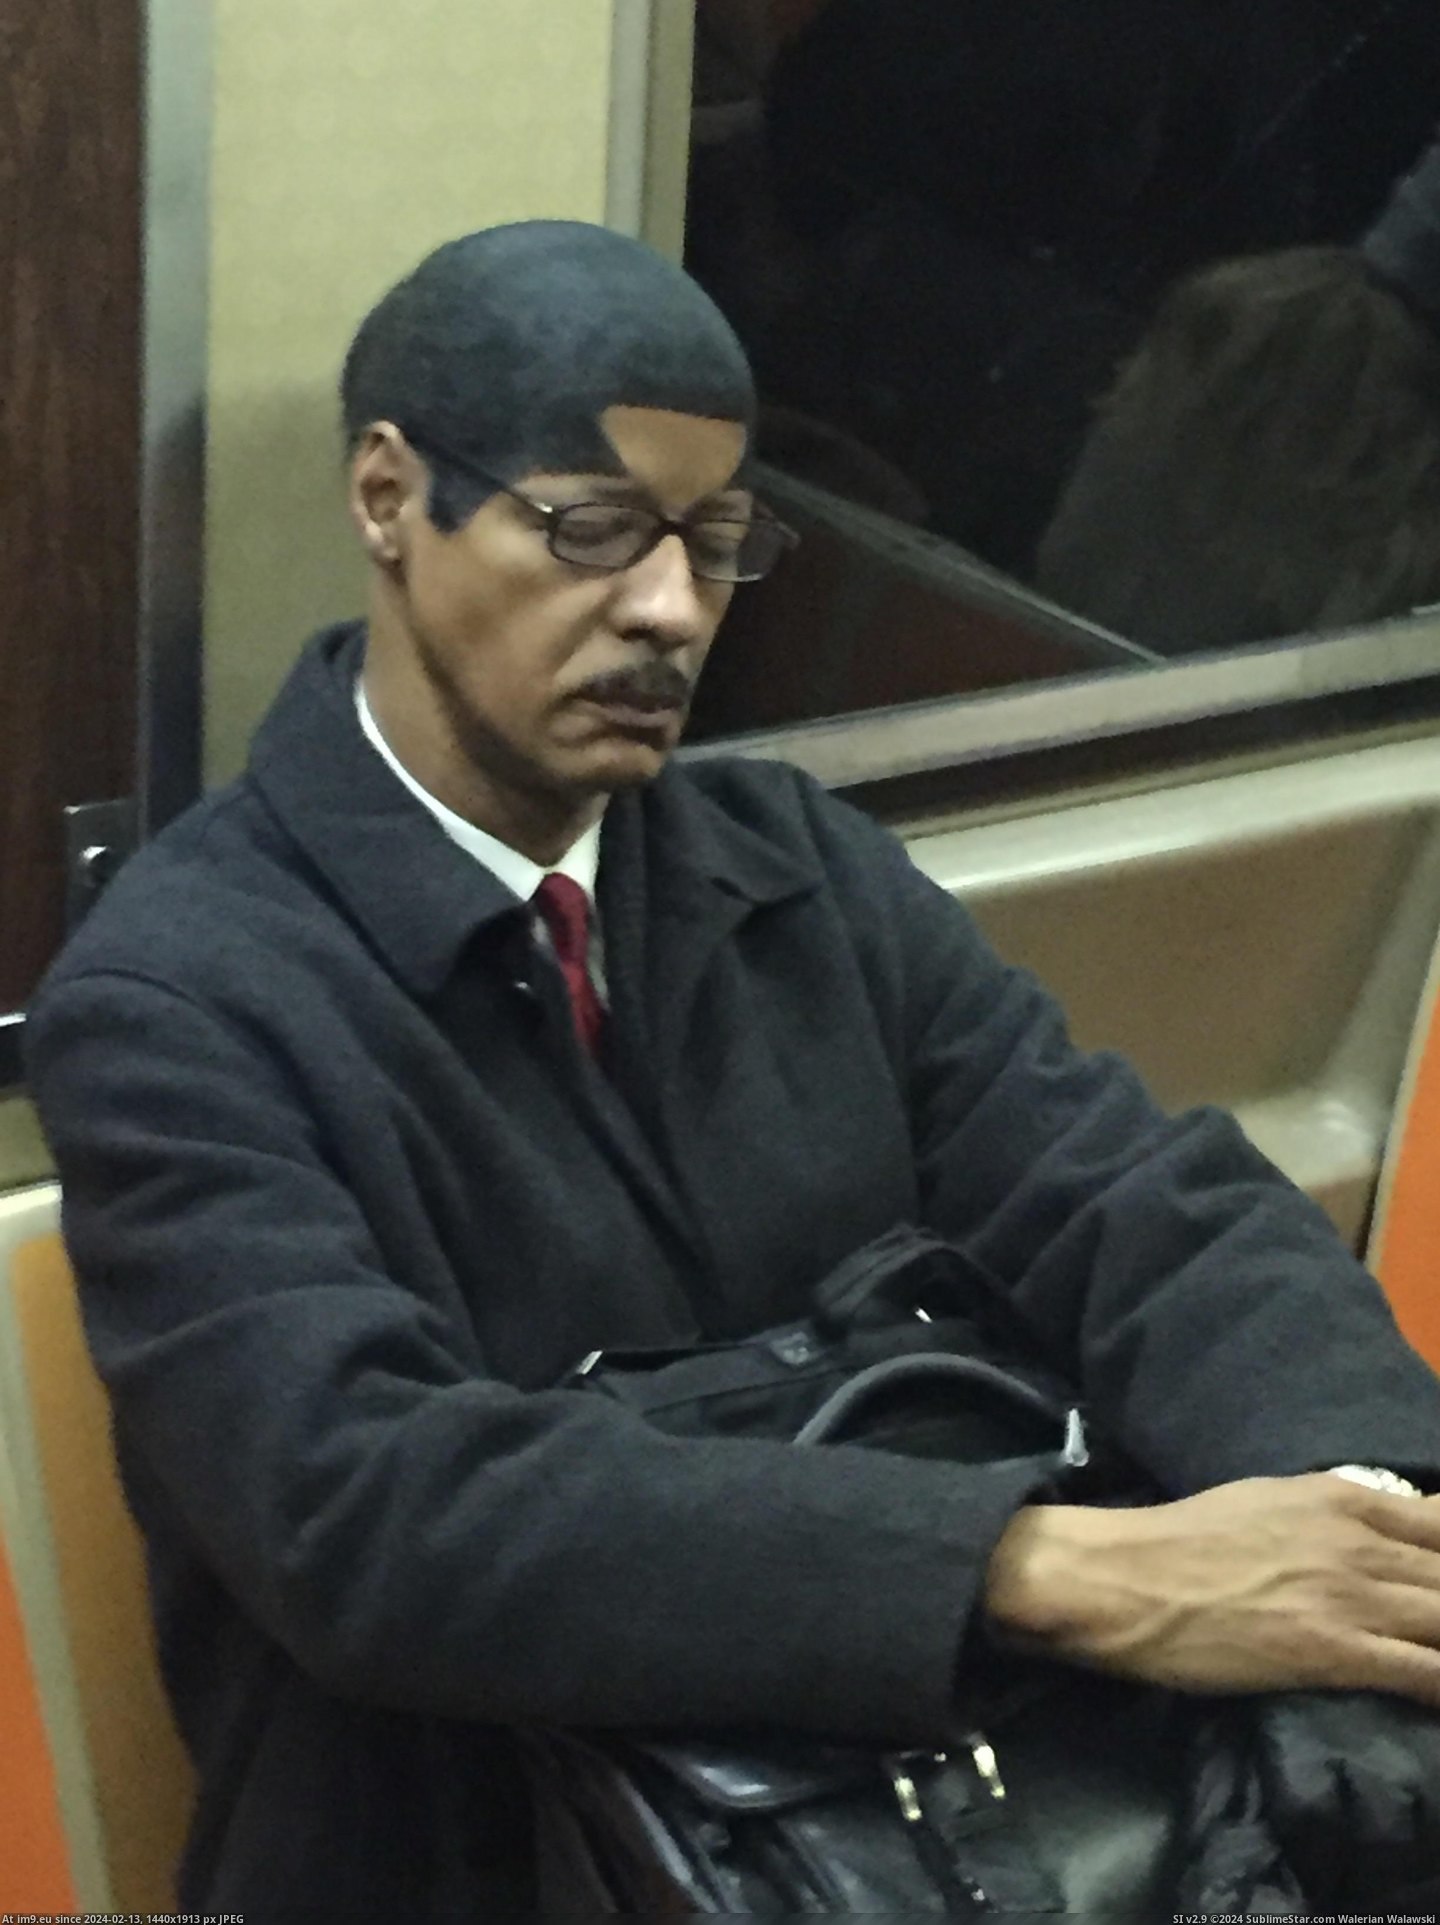 #Wtf #Guy #Sharpie #Nyc #Subway [Wtf] Guy with a Sharpie'd hairline on a NYC subway Pic. (Bild von album My r/WTF favs))